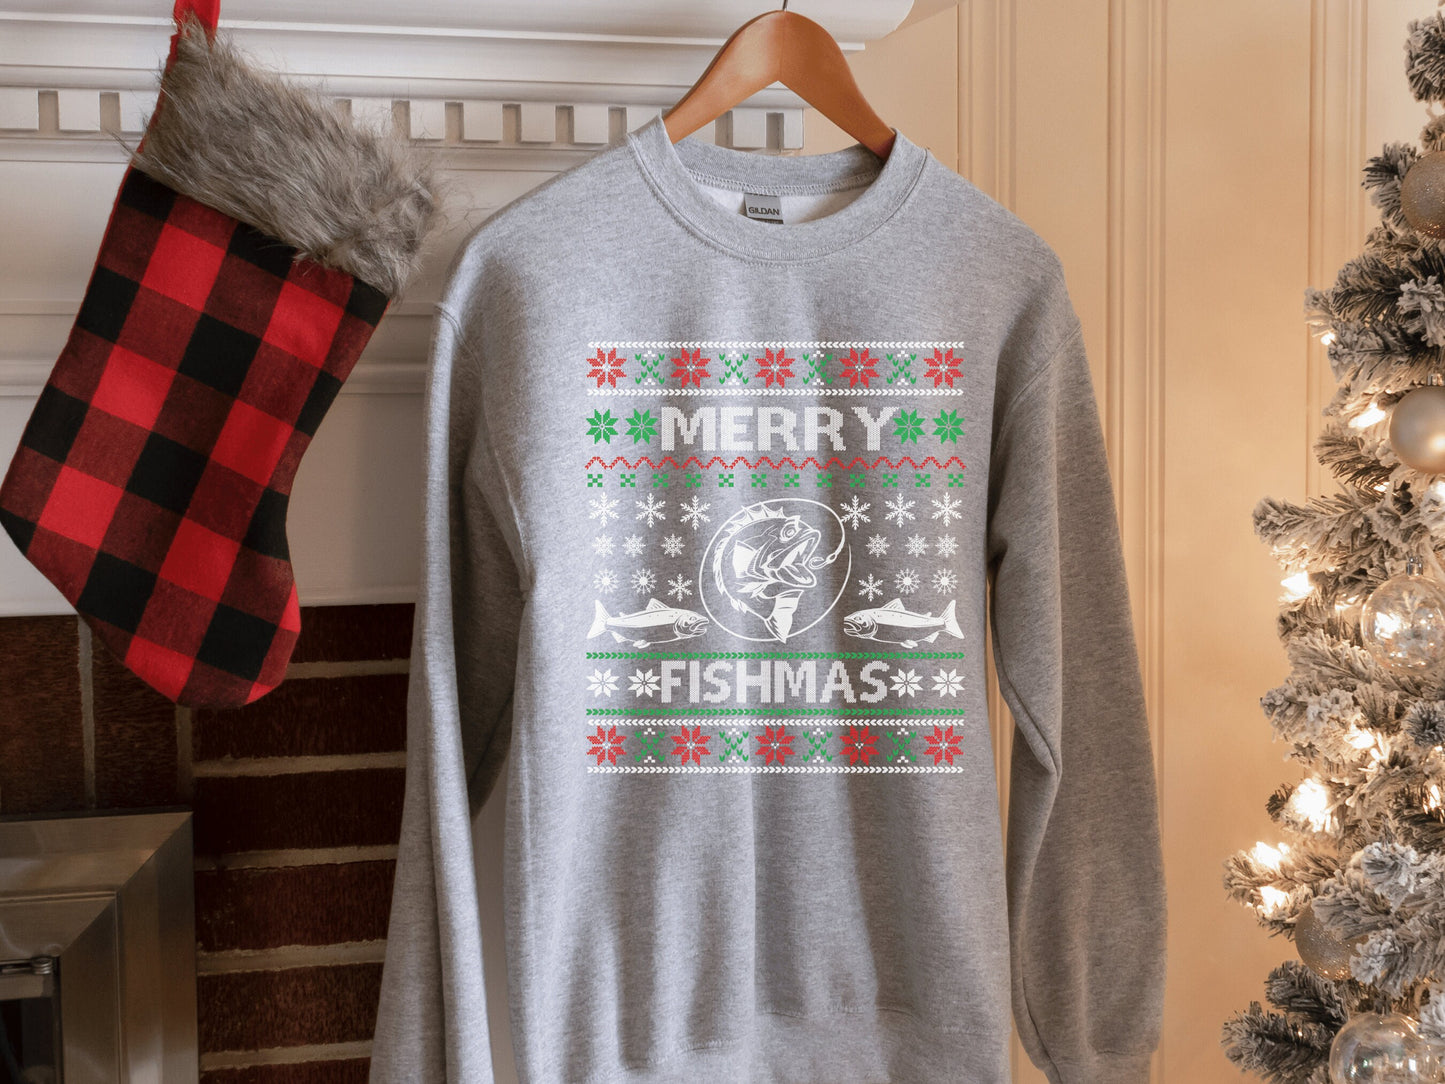 Fishing Gifts for Men, Ugly Christmas Sweater for Men, Merry Fishmas Ugly Christmas Sweater, Merry Fishmas Fishing Ugly Christmas Sweater